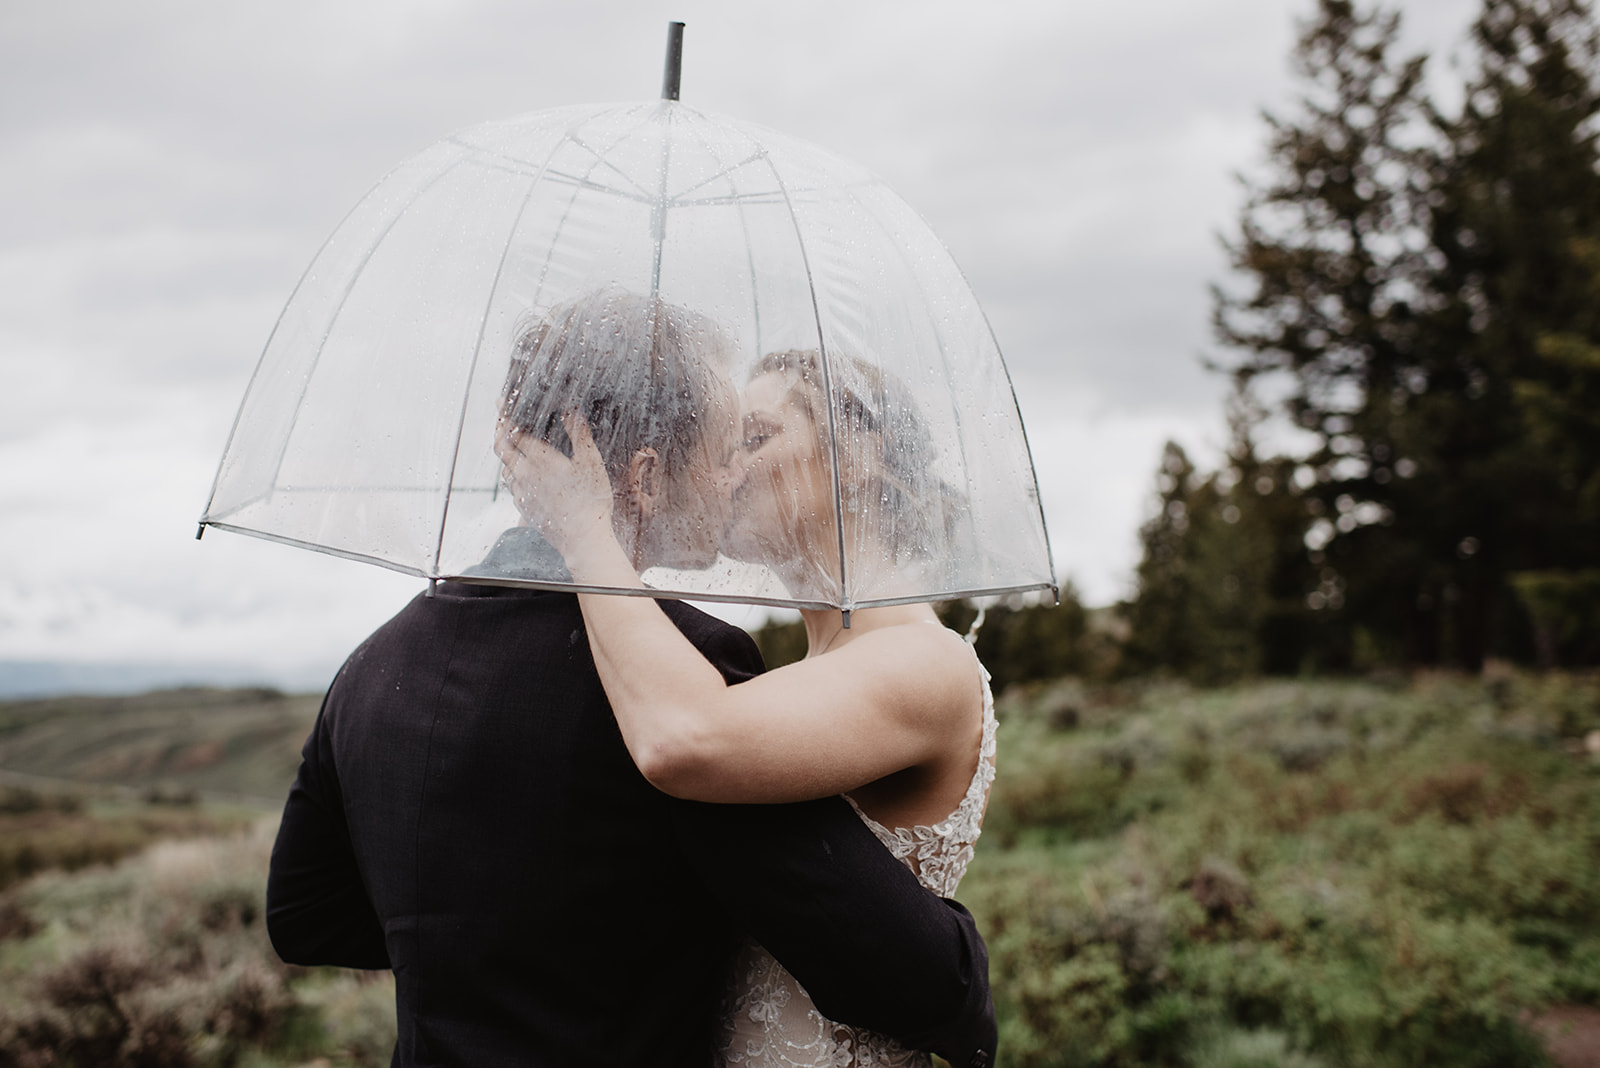 rainy wedding day with bride adn groom under a clear umbrella kissing as the bride embraces her groom captured by Jackson Hole wedding photographers